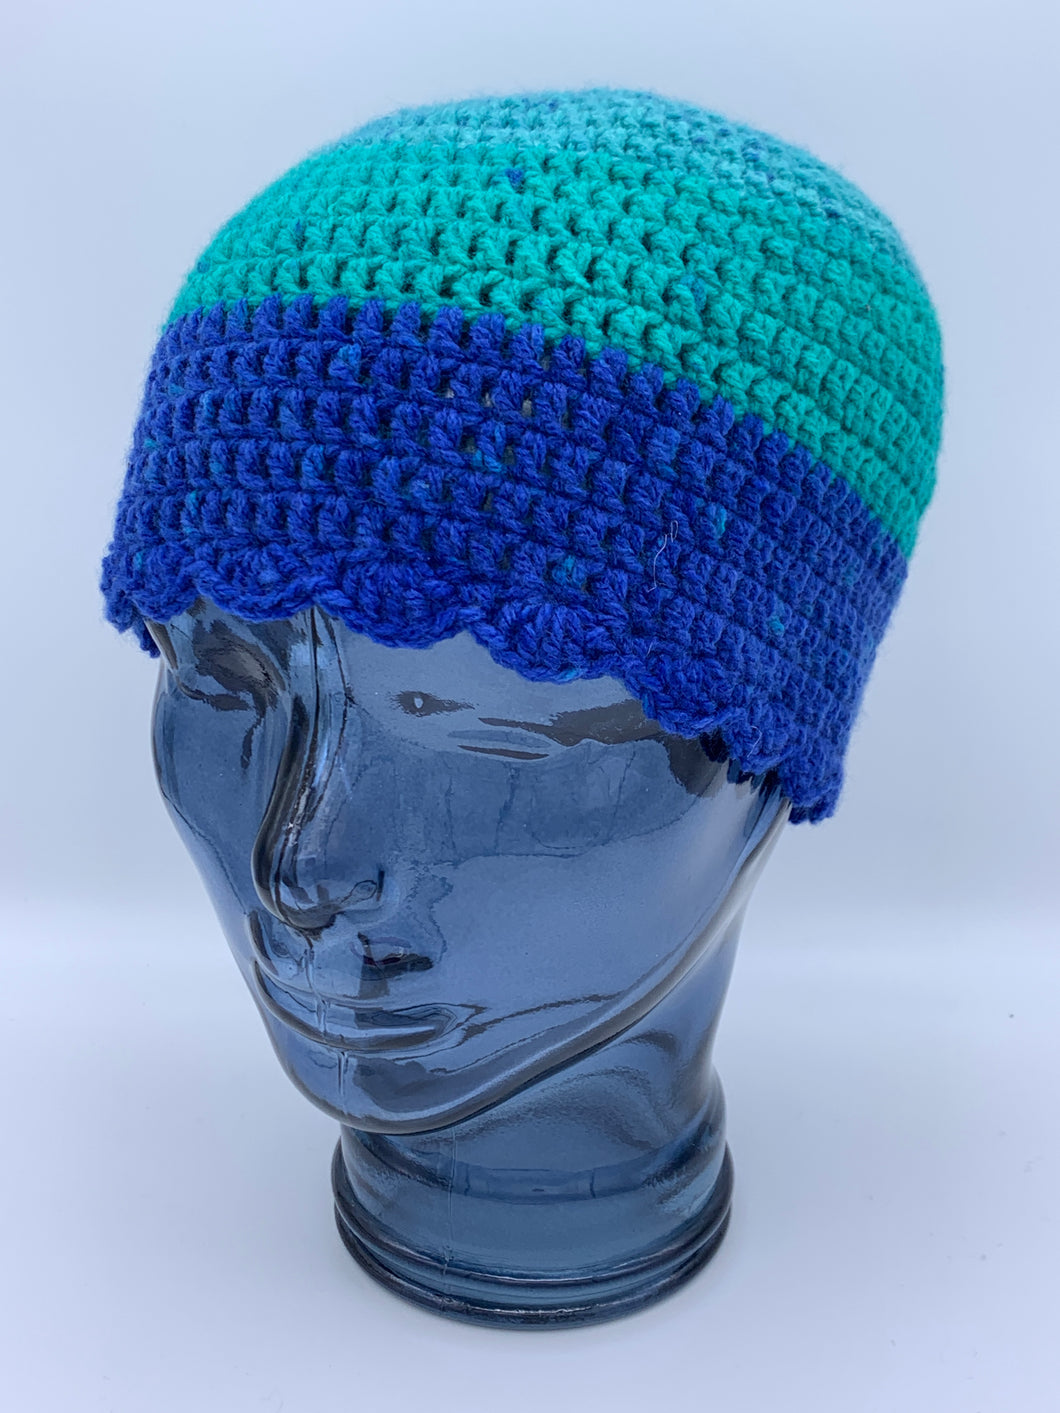 Crochet two-tone green and blue beanie hat - Size medium adult